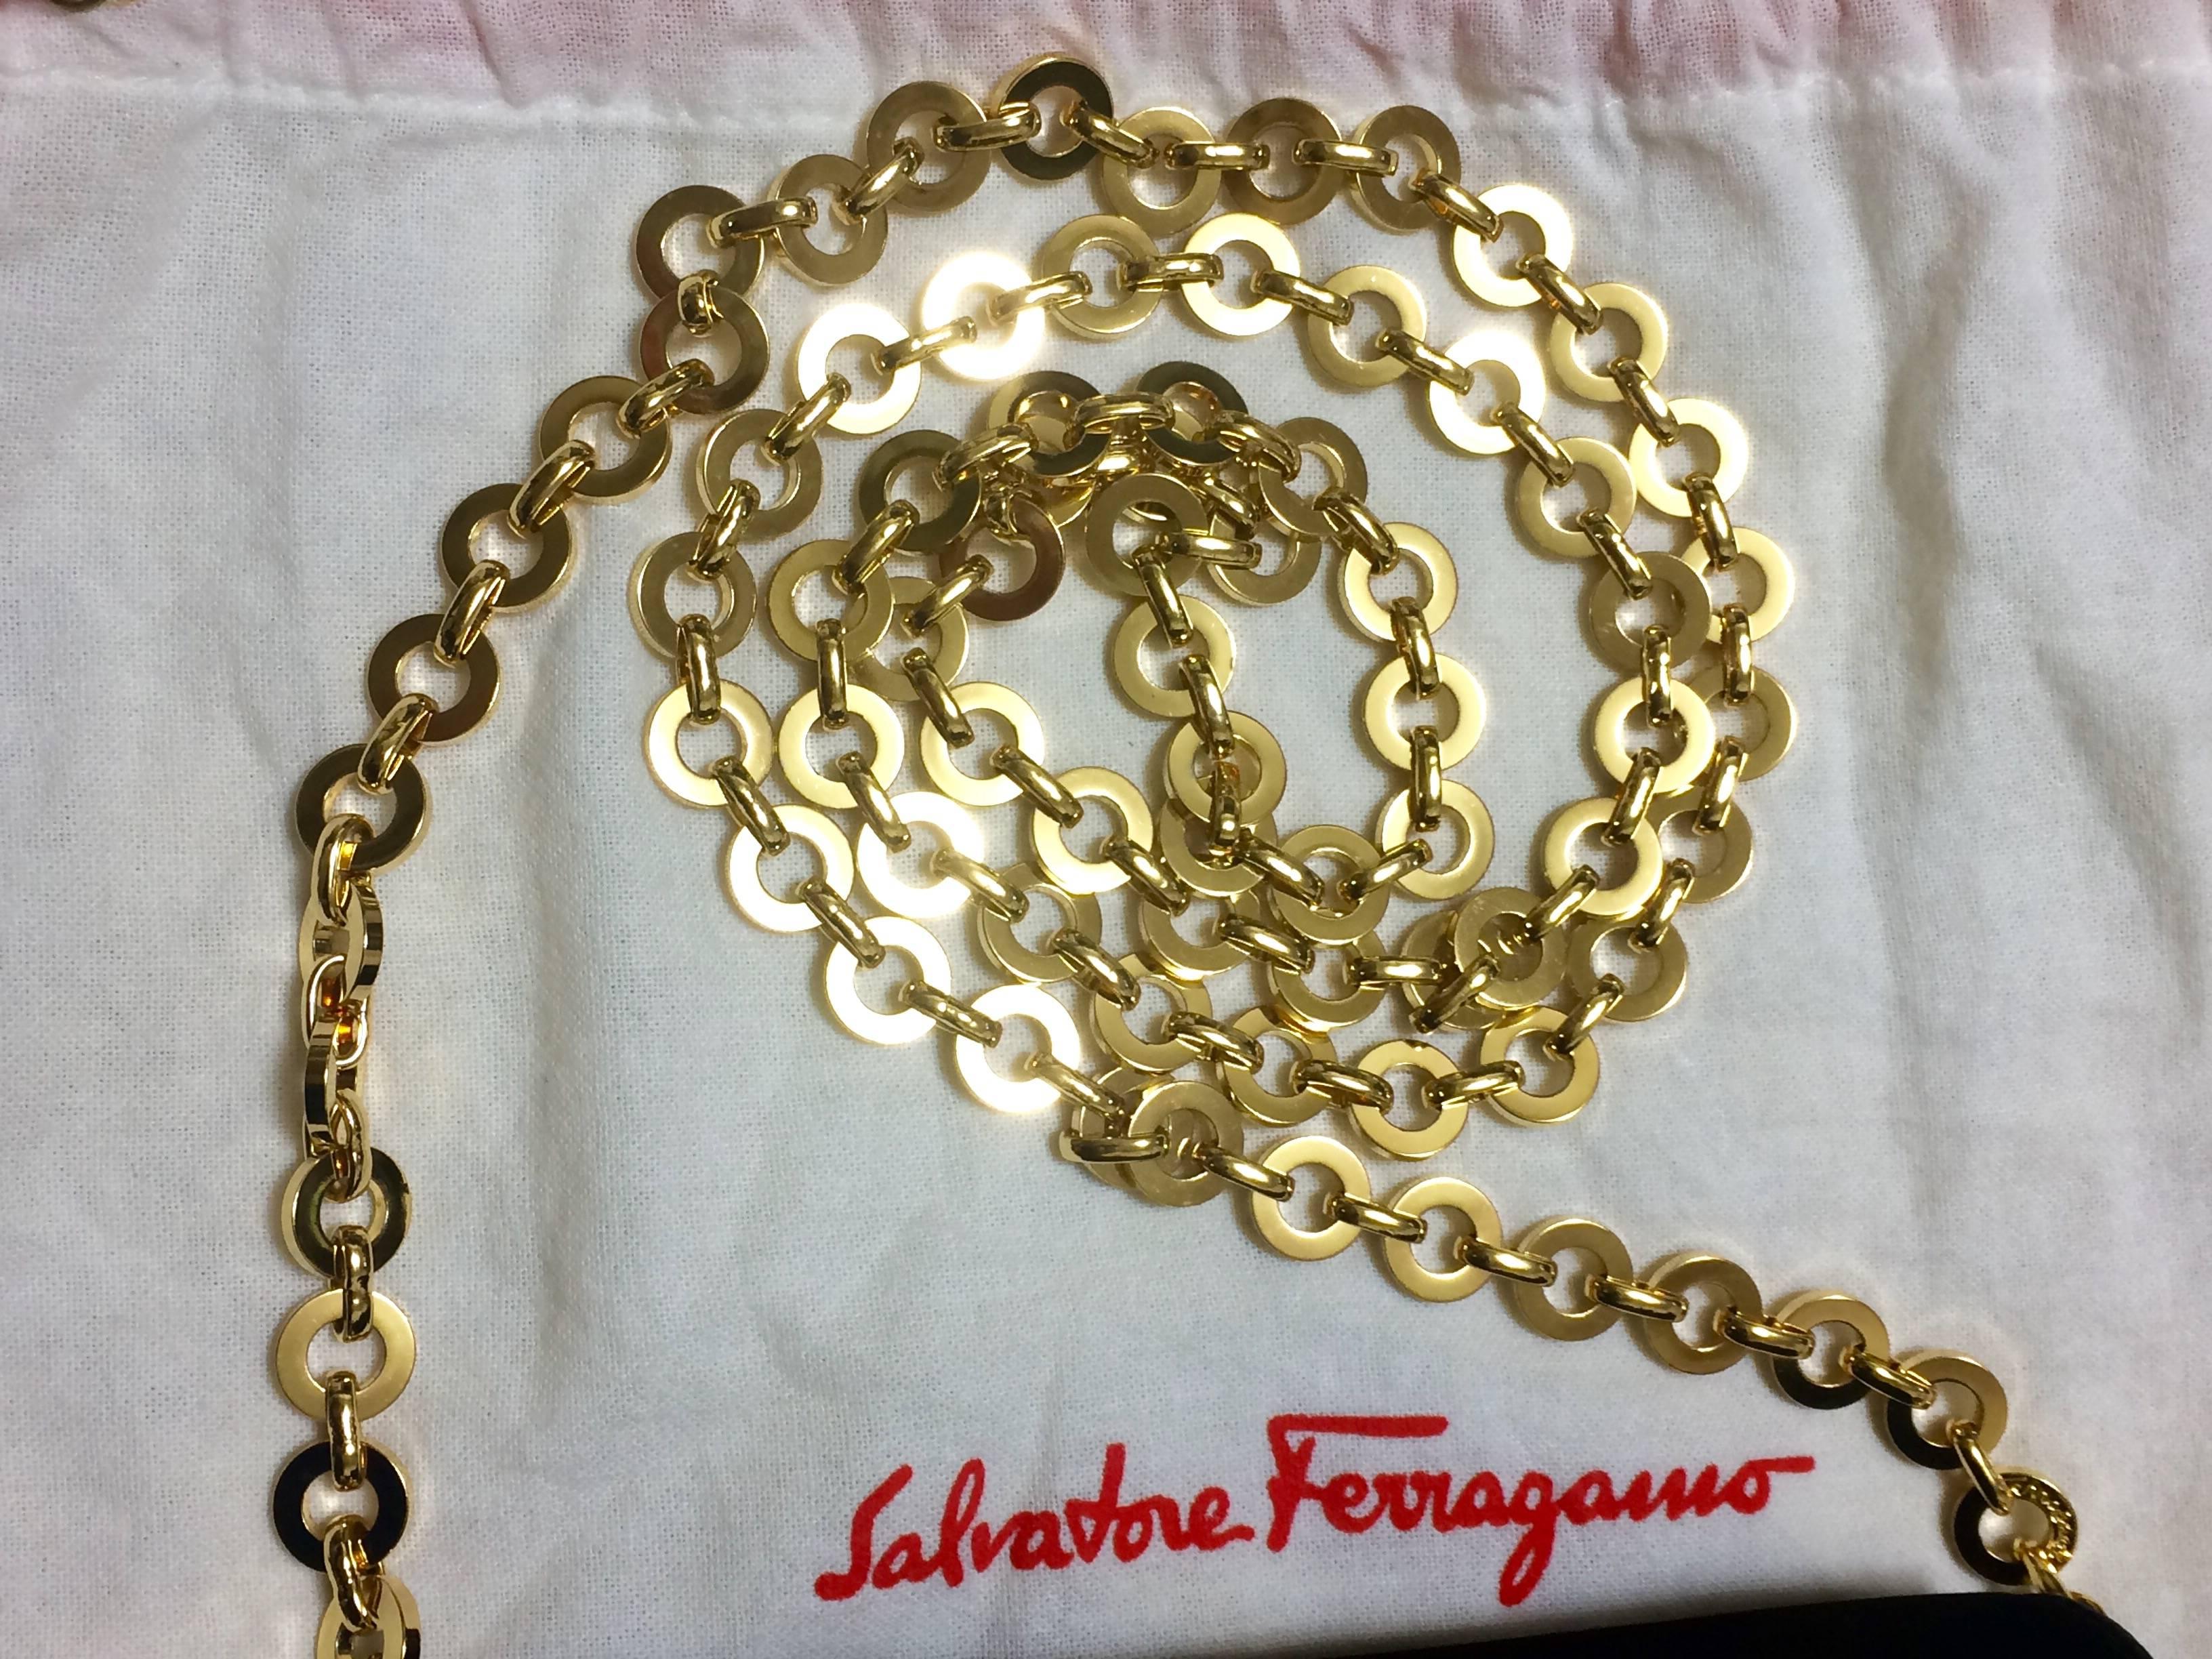 Vintage Salvatore Ferragamo black shoulder mini bag with gold chain and Vara bow For Sale 1